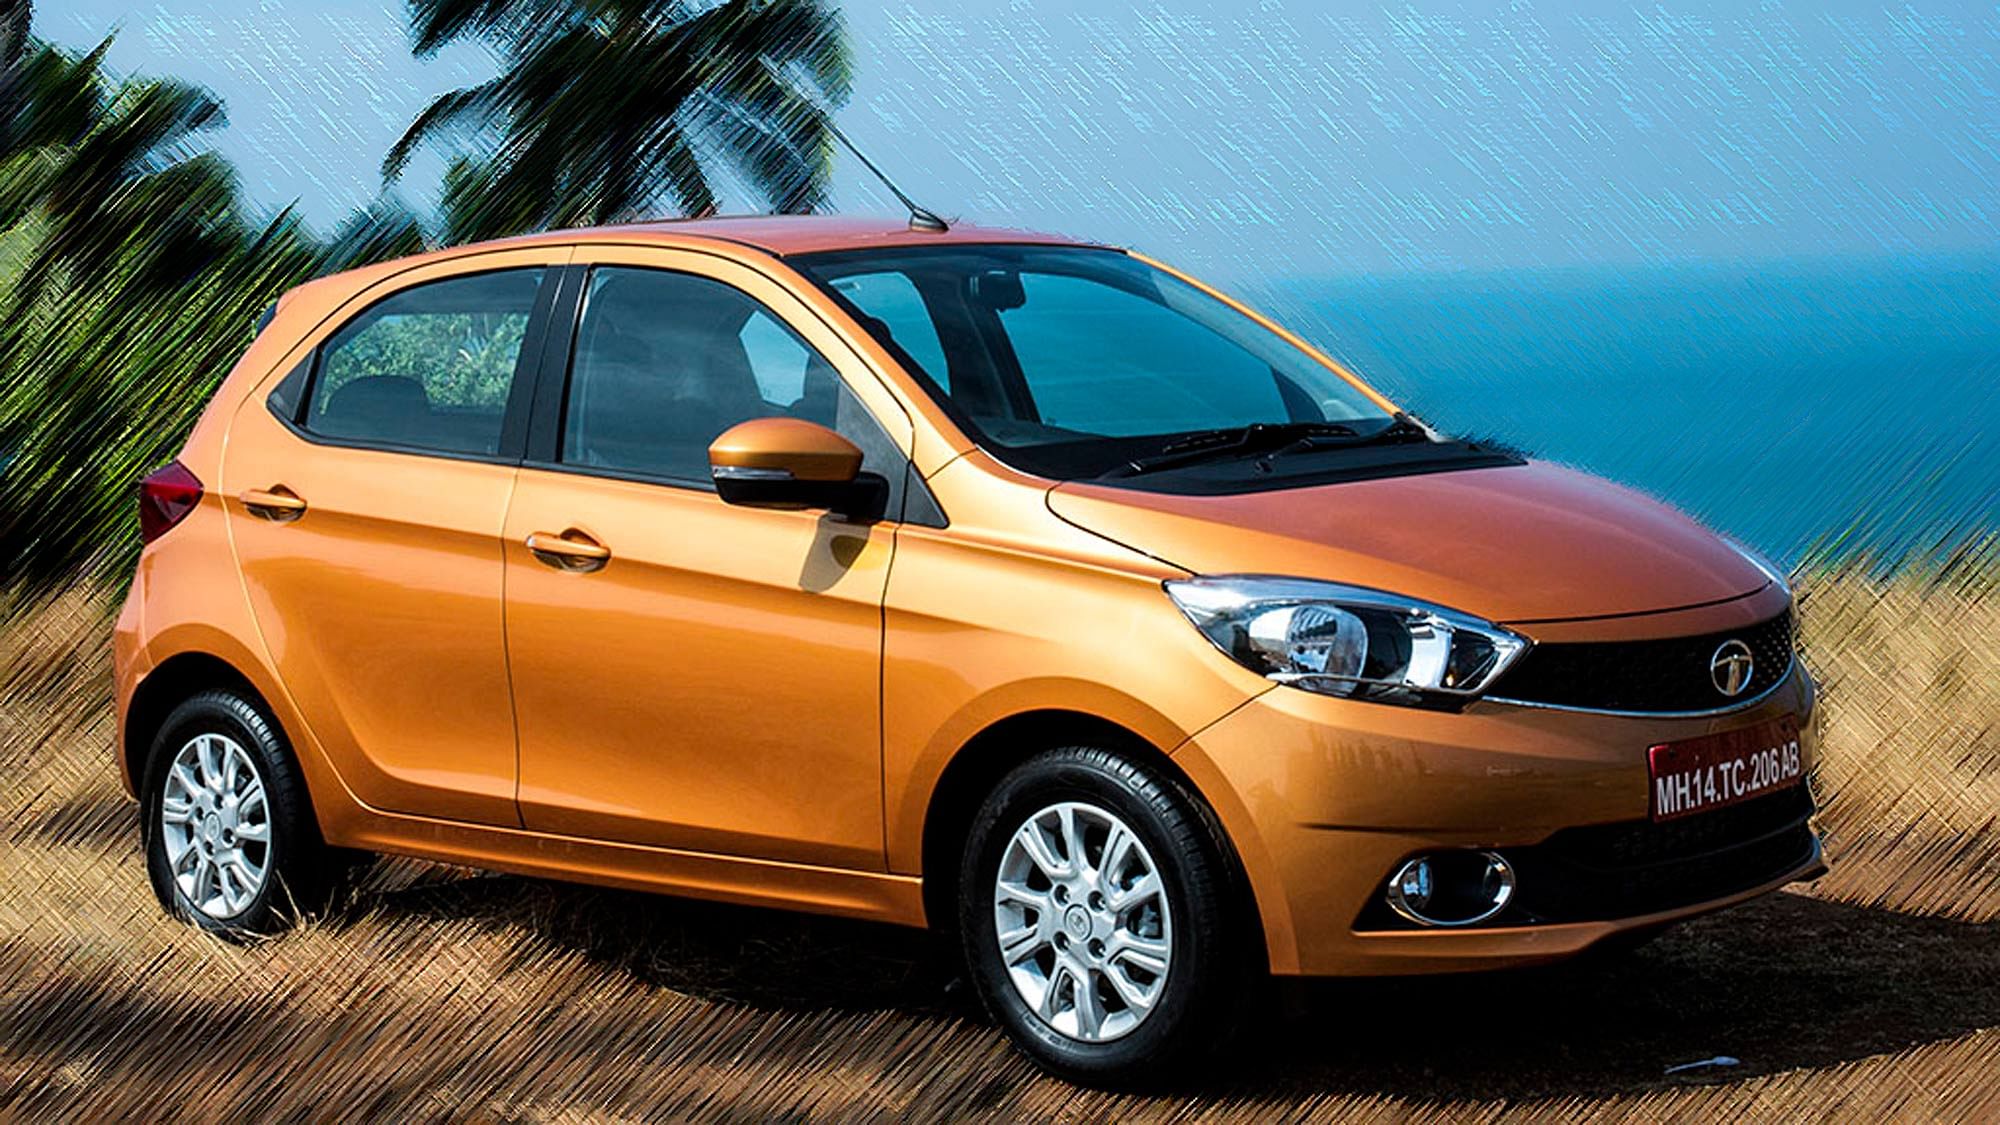 Tata Zica is set to hit the roads in 2016. (Photo Courtesy: <a href="https://www.motorscribes.com/">MotorScribes</a>)